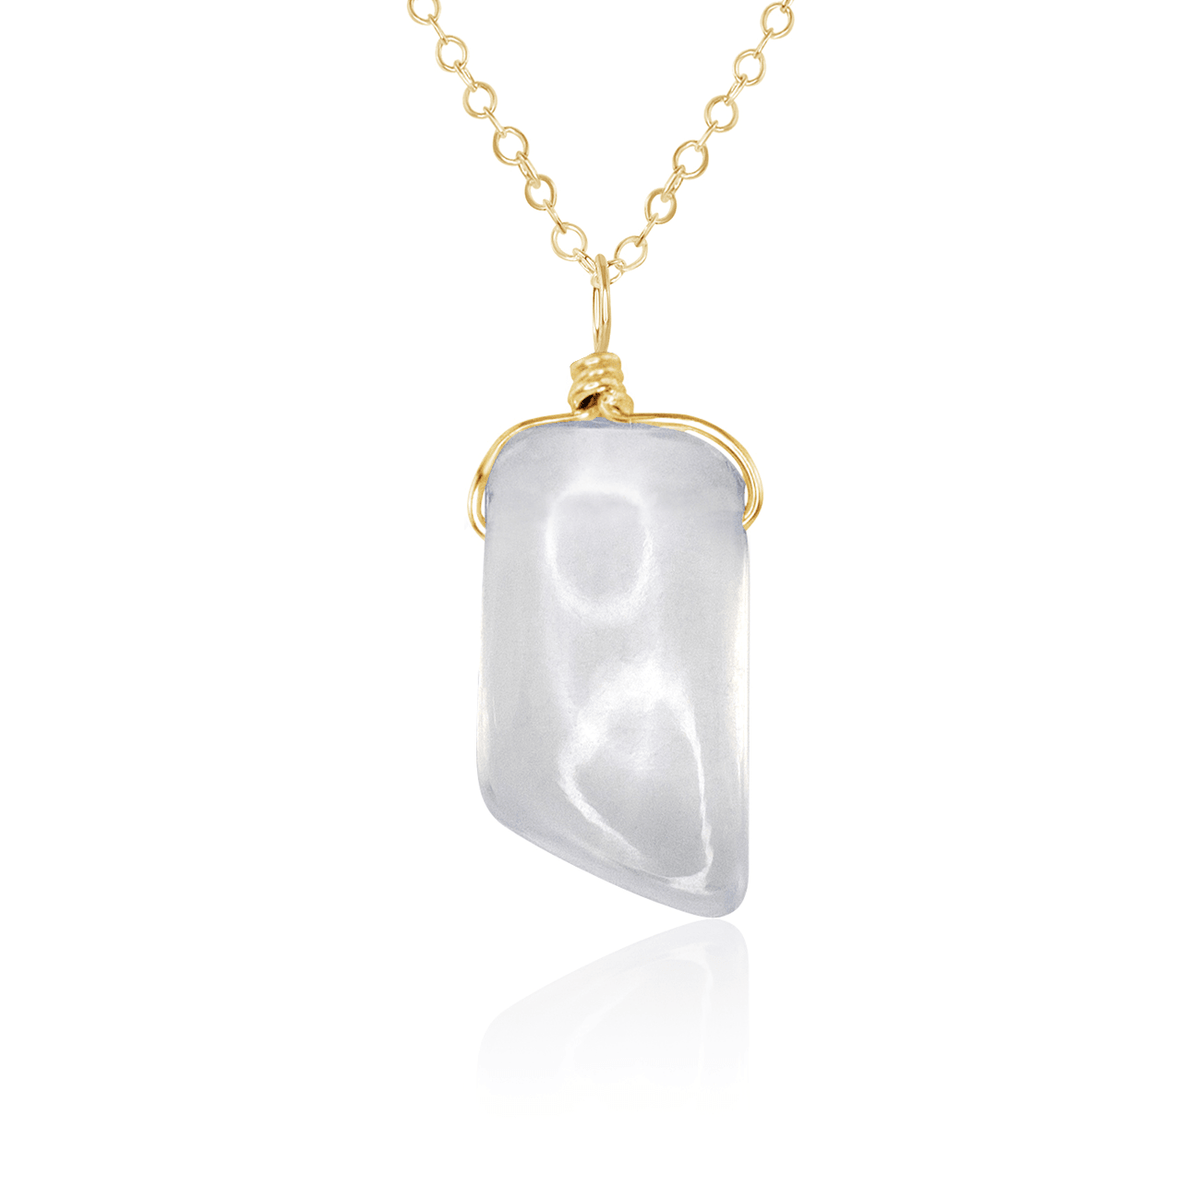 Small Smooth Crystal Quartz Gentle Point Crystal Pendant Necklace - Small Smooth Crystal Quartz Gentle Point Crystal Pendant Necklace - 14k Gold Fill / Cable - Luna Tide Handmade Crystal Jewellery